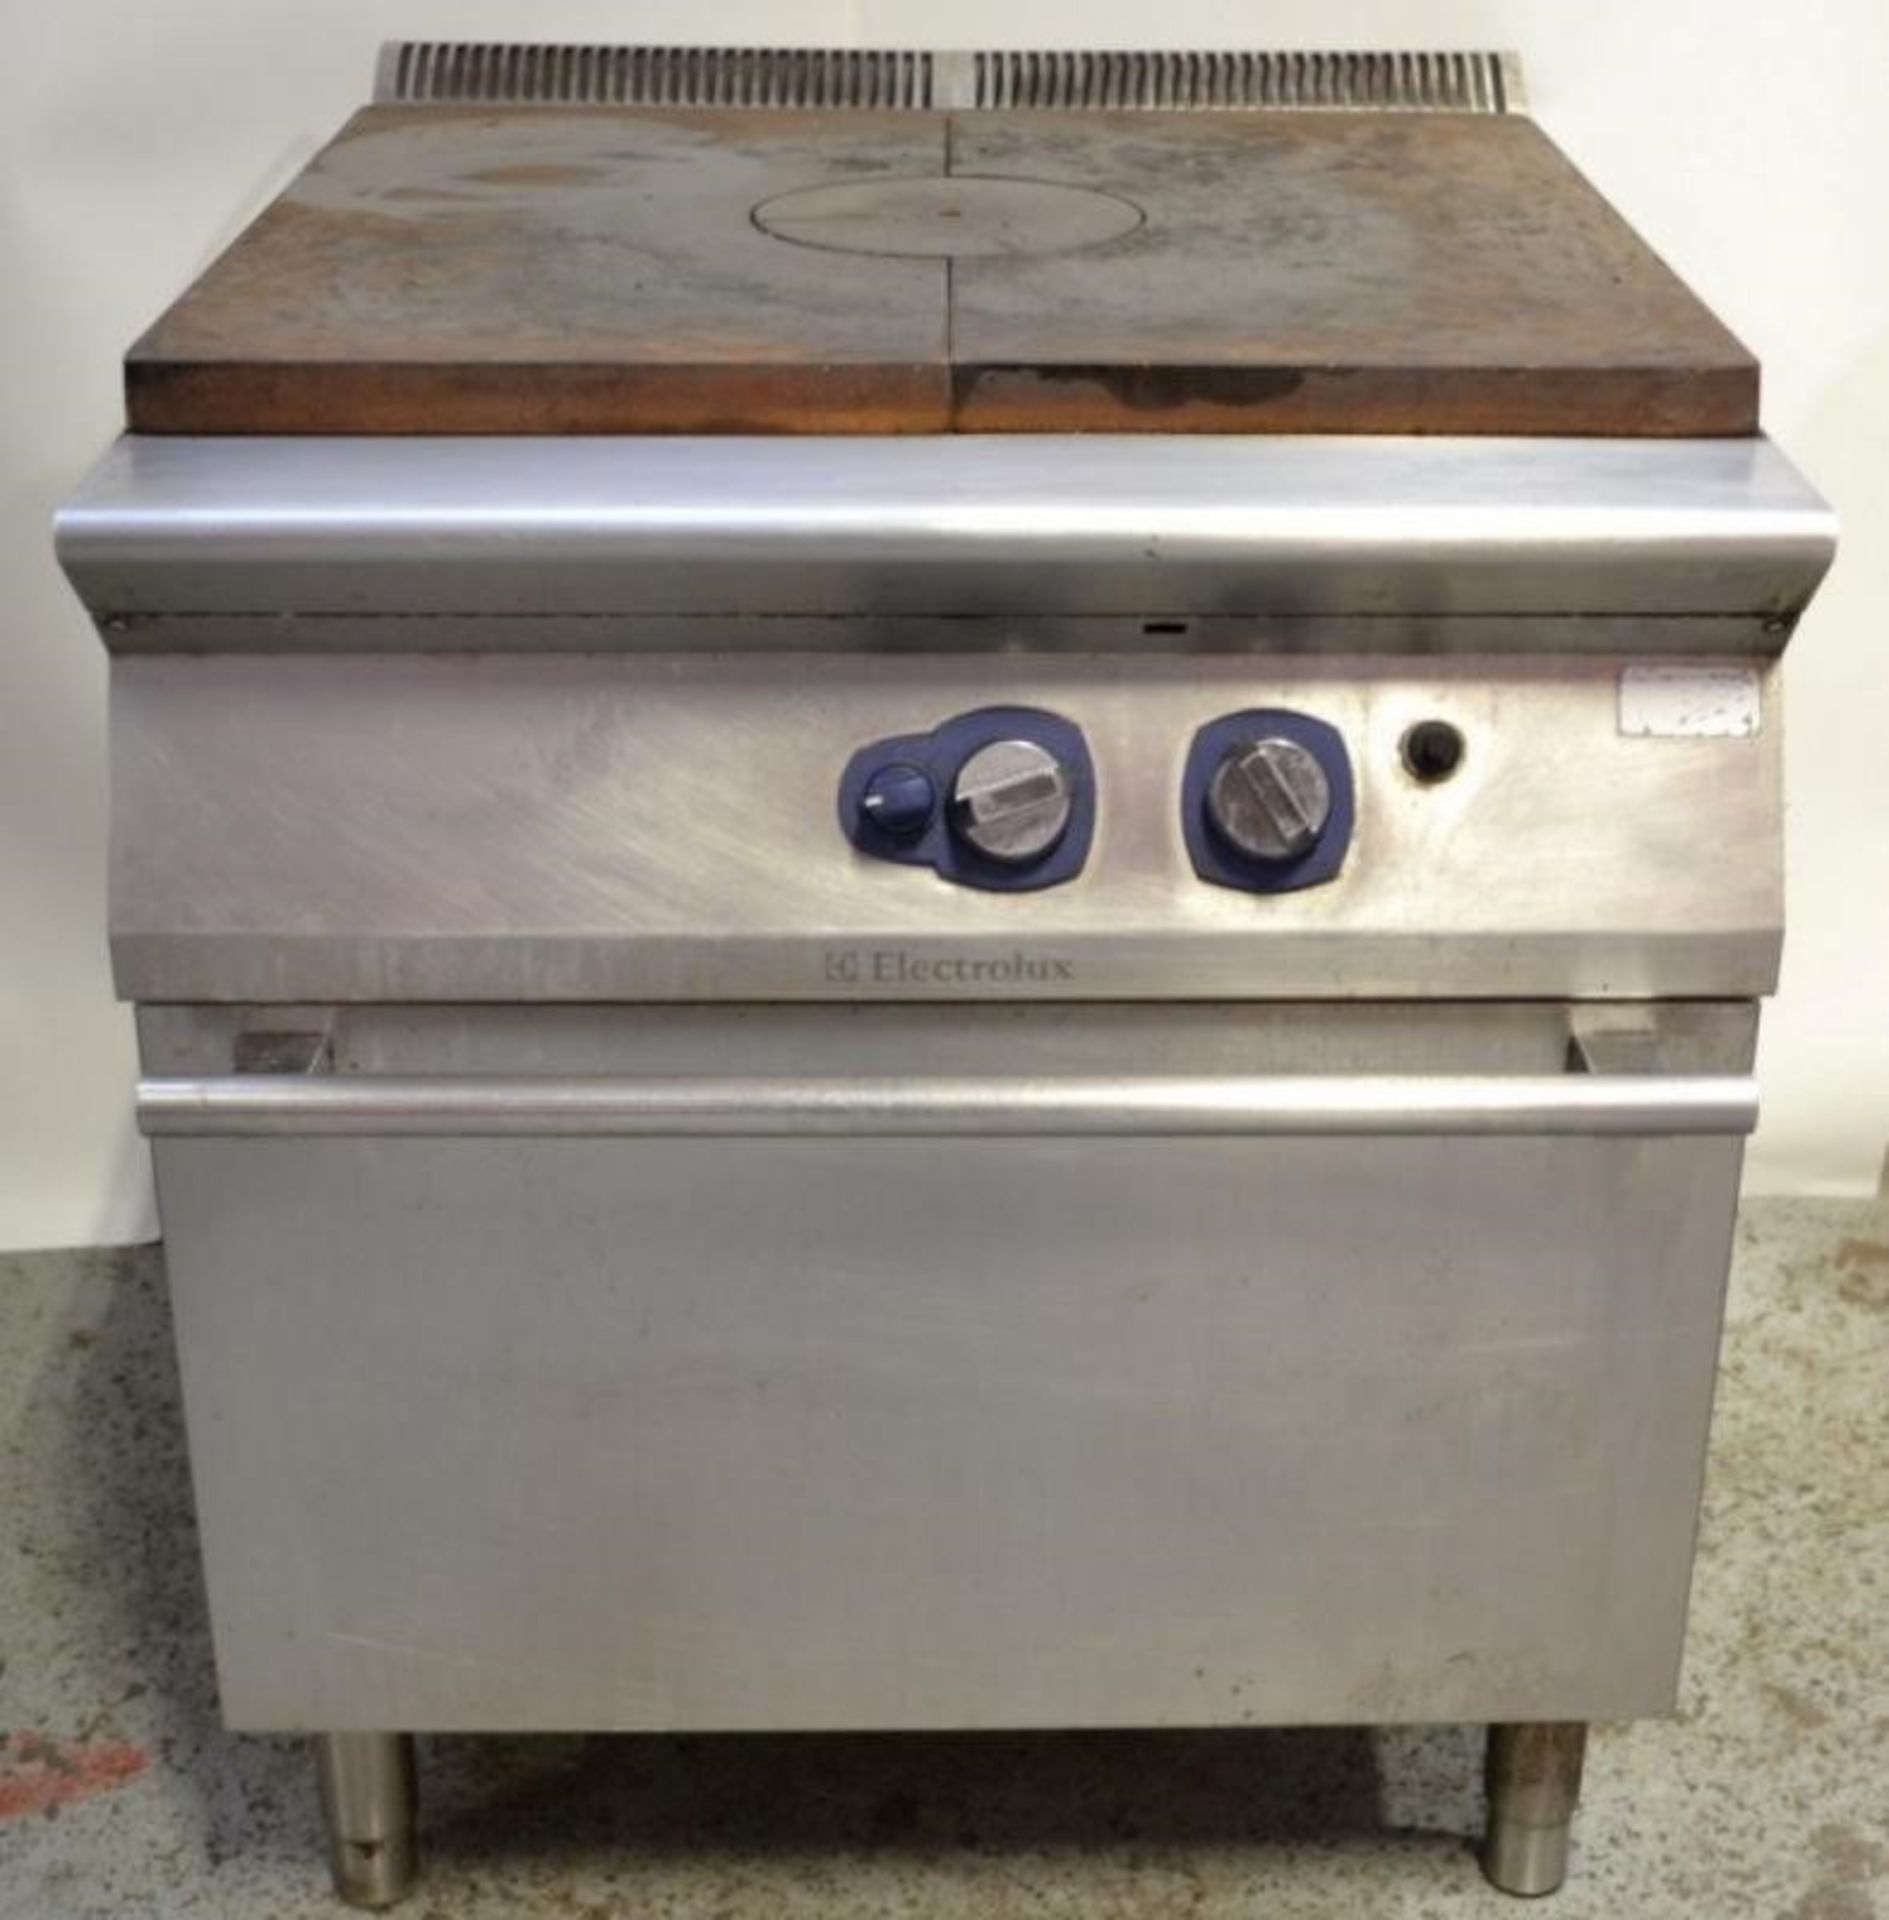 1 x Electrolux Commercial Stainless Steel Solid Top Oven With a Durable Cast-iron Cooking Surface -